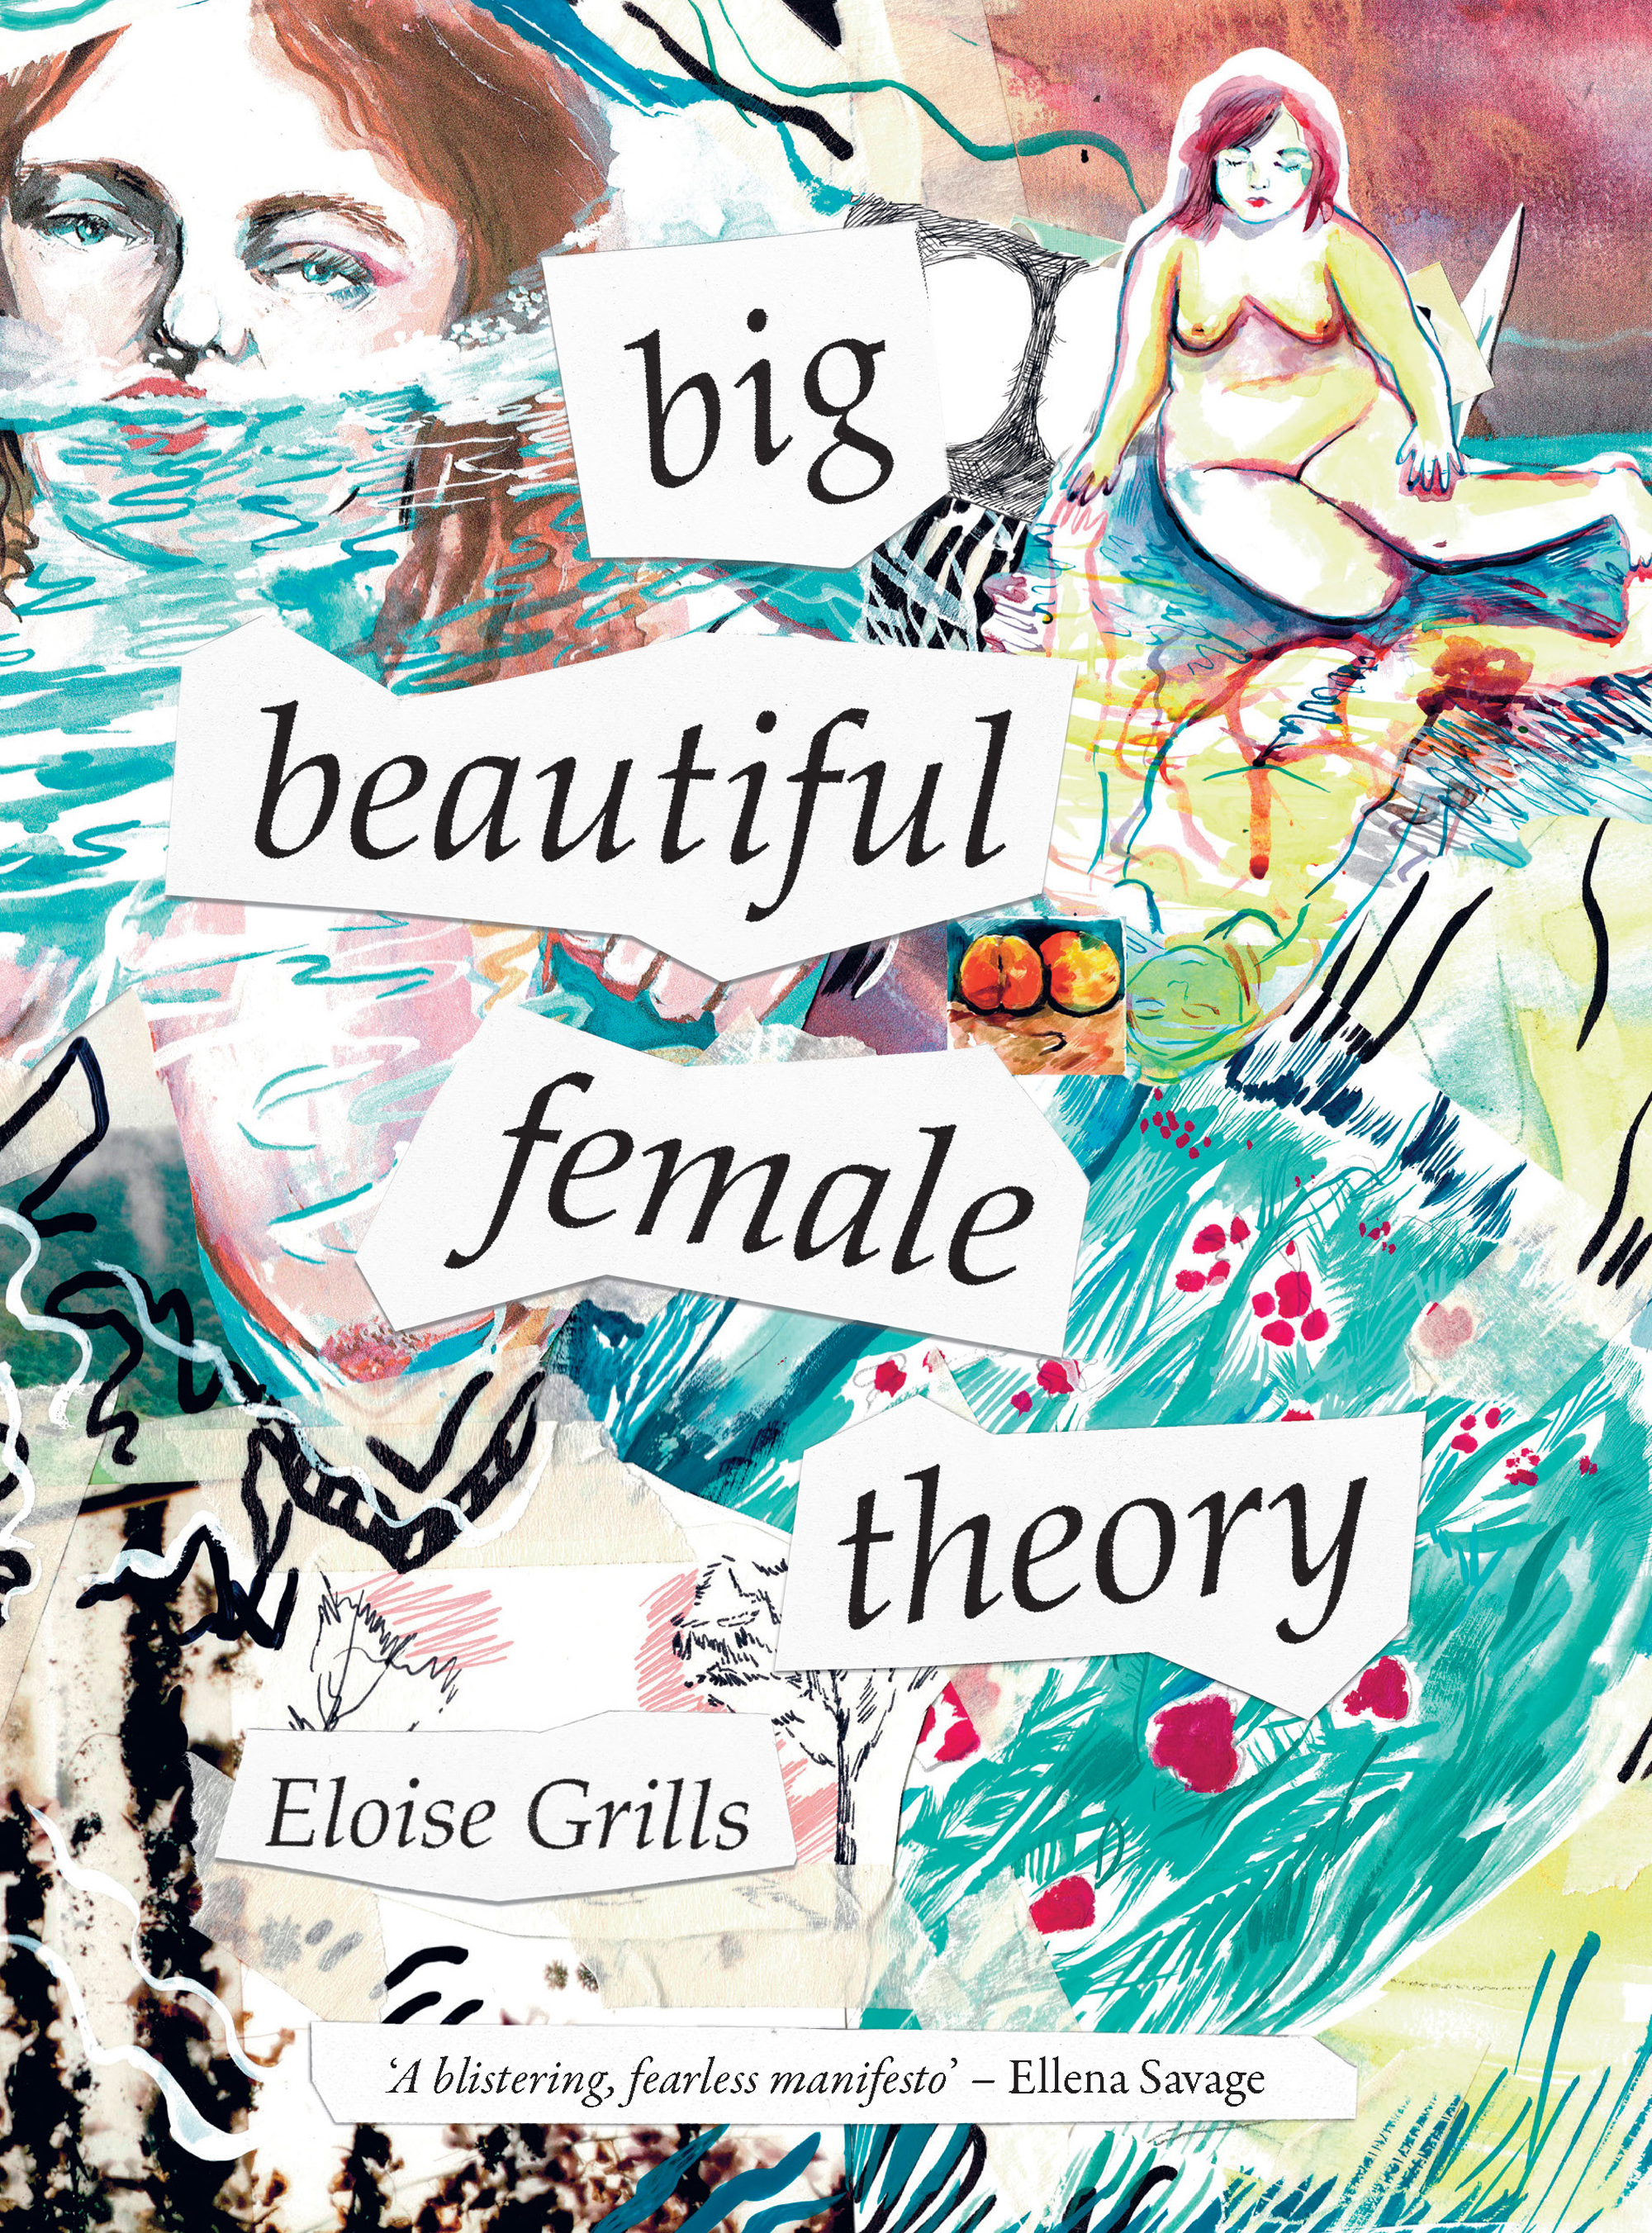 Cover of big beautiful female theory by Eloise Grills featuring a collage of images of women, water and earth.